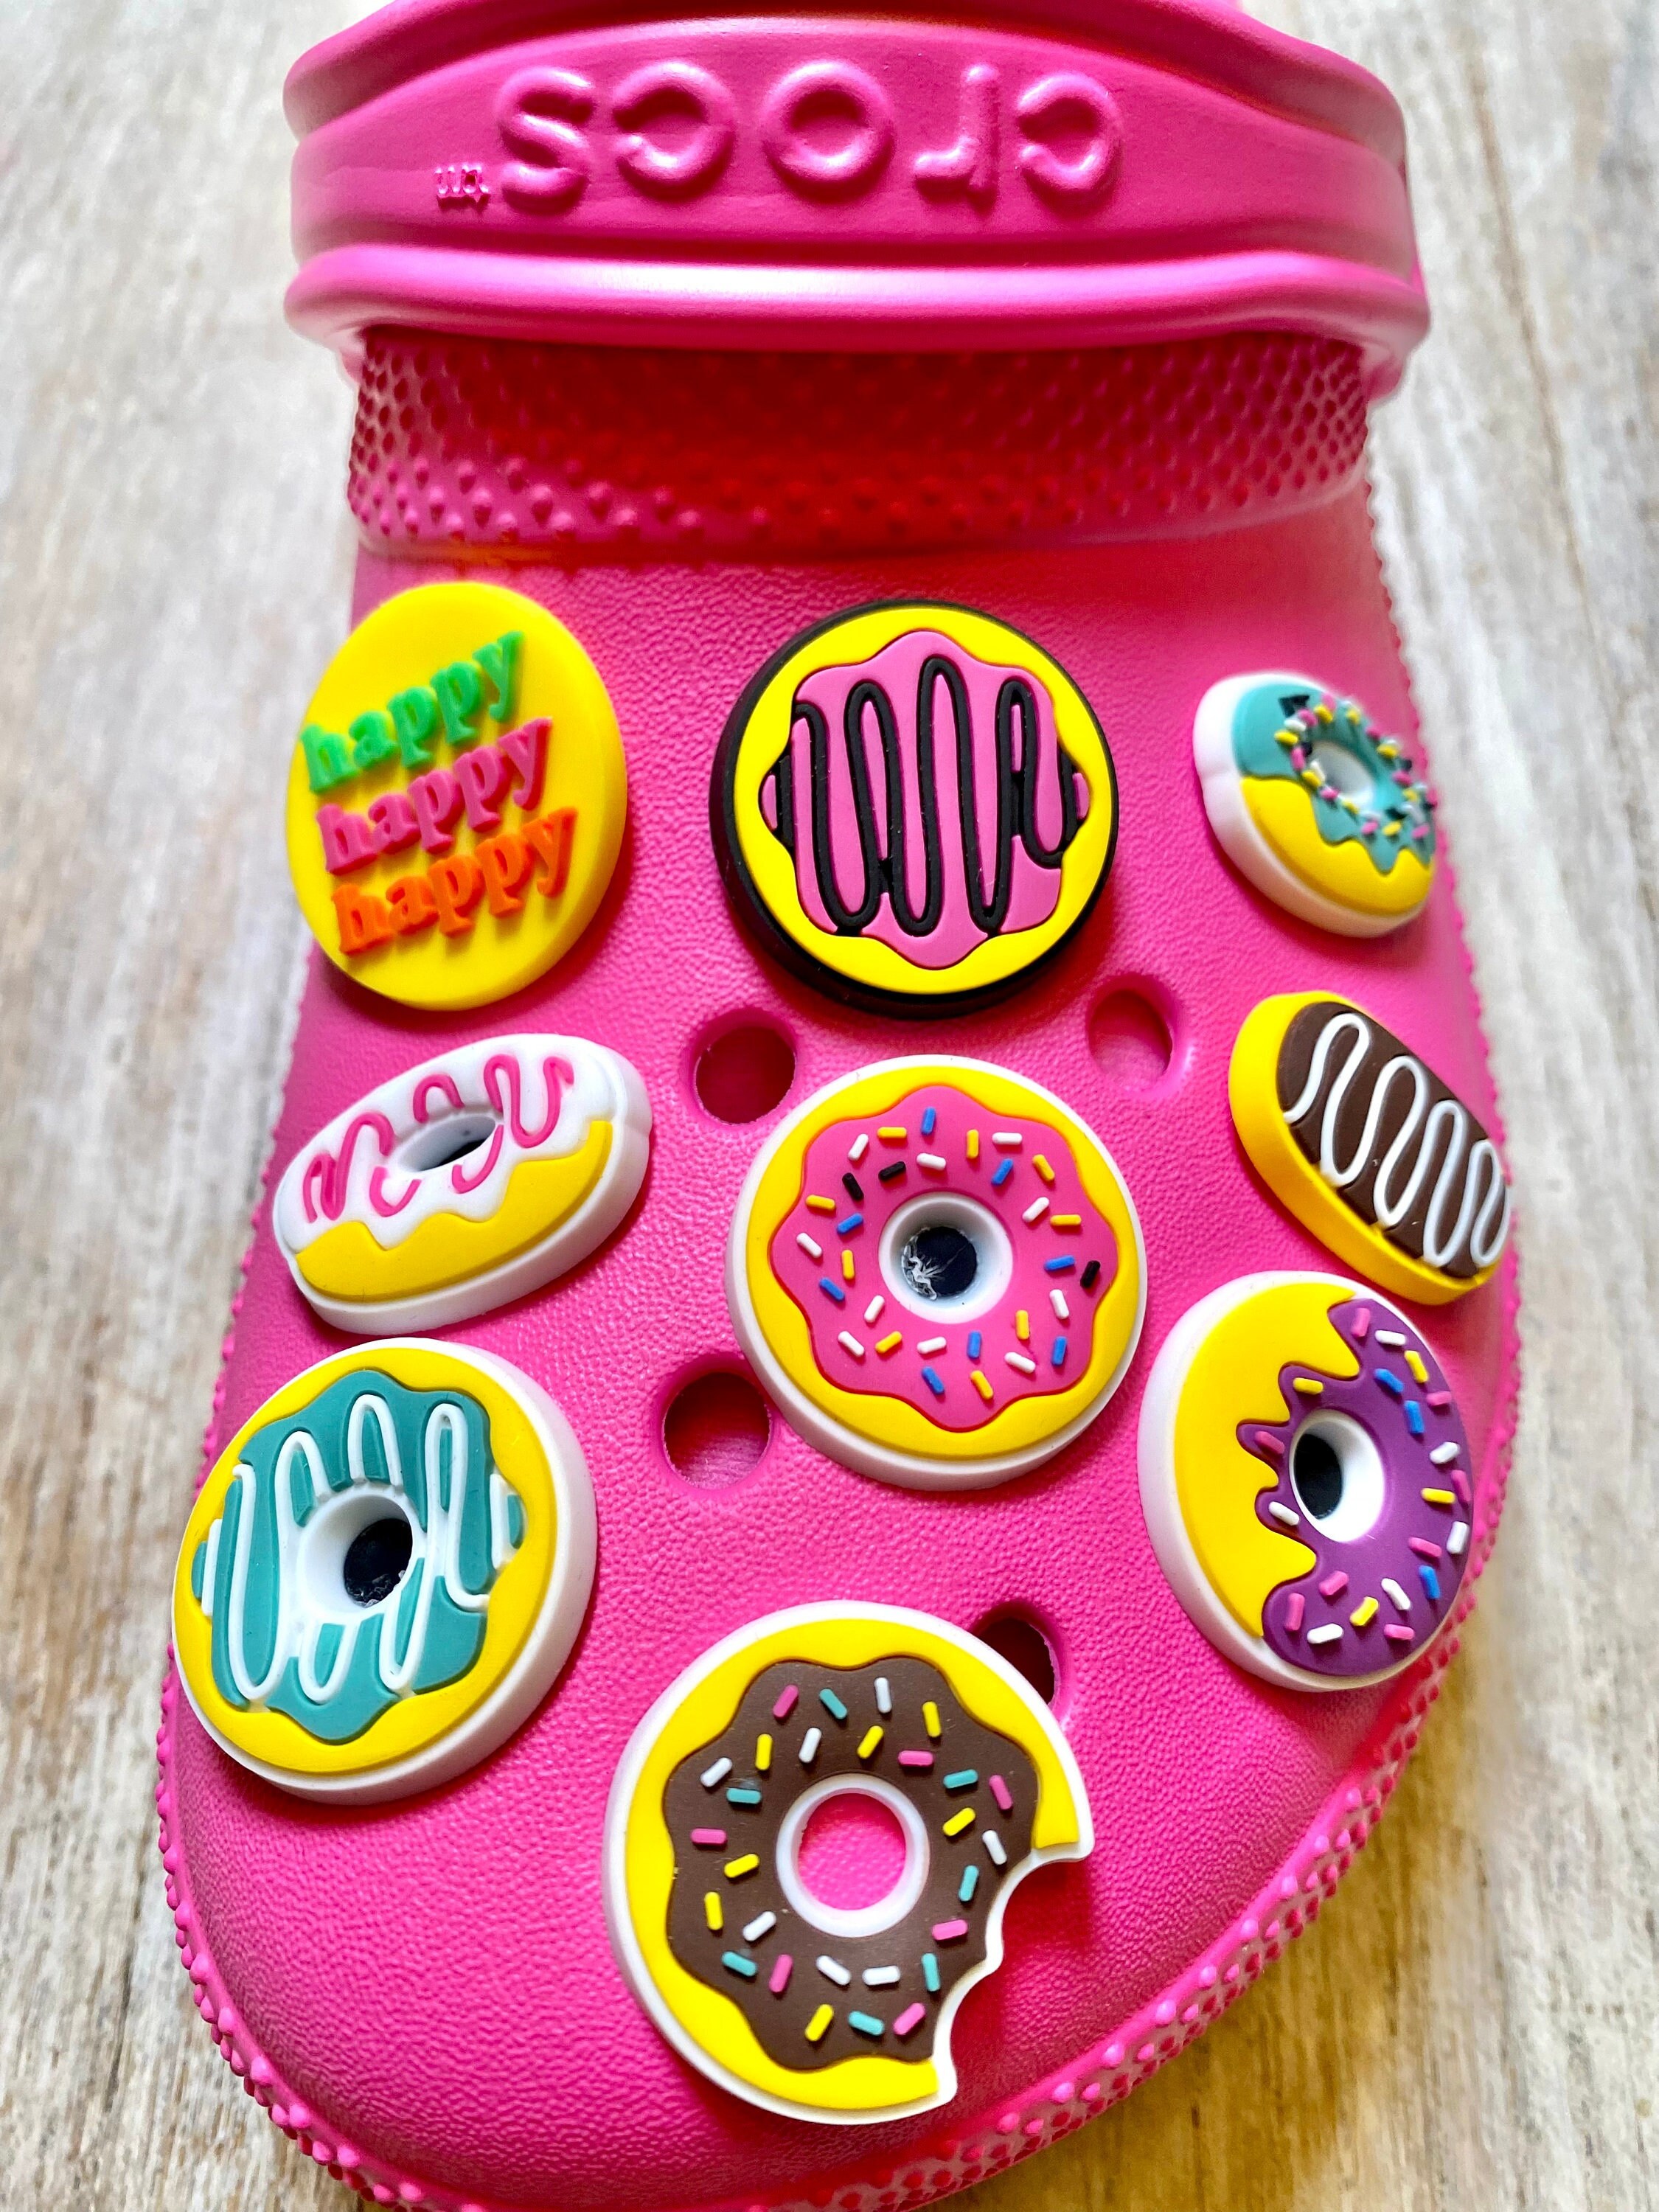 Yilahape 36PCS Food Shoe Charms,Donut Shoe Charms Decoration,Cute Sweet  Food Charms Gifts For Kids, Boys, Girls,Teens,Birthday Party Favor